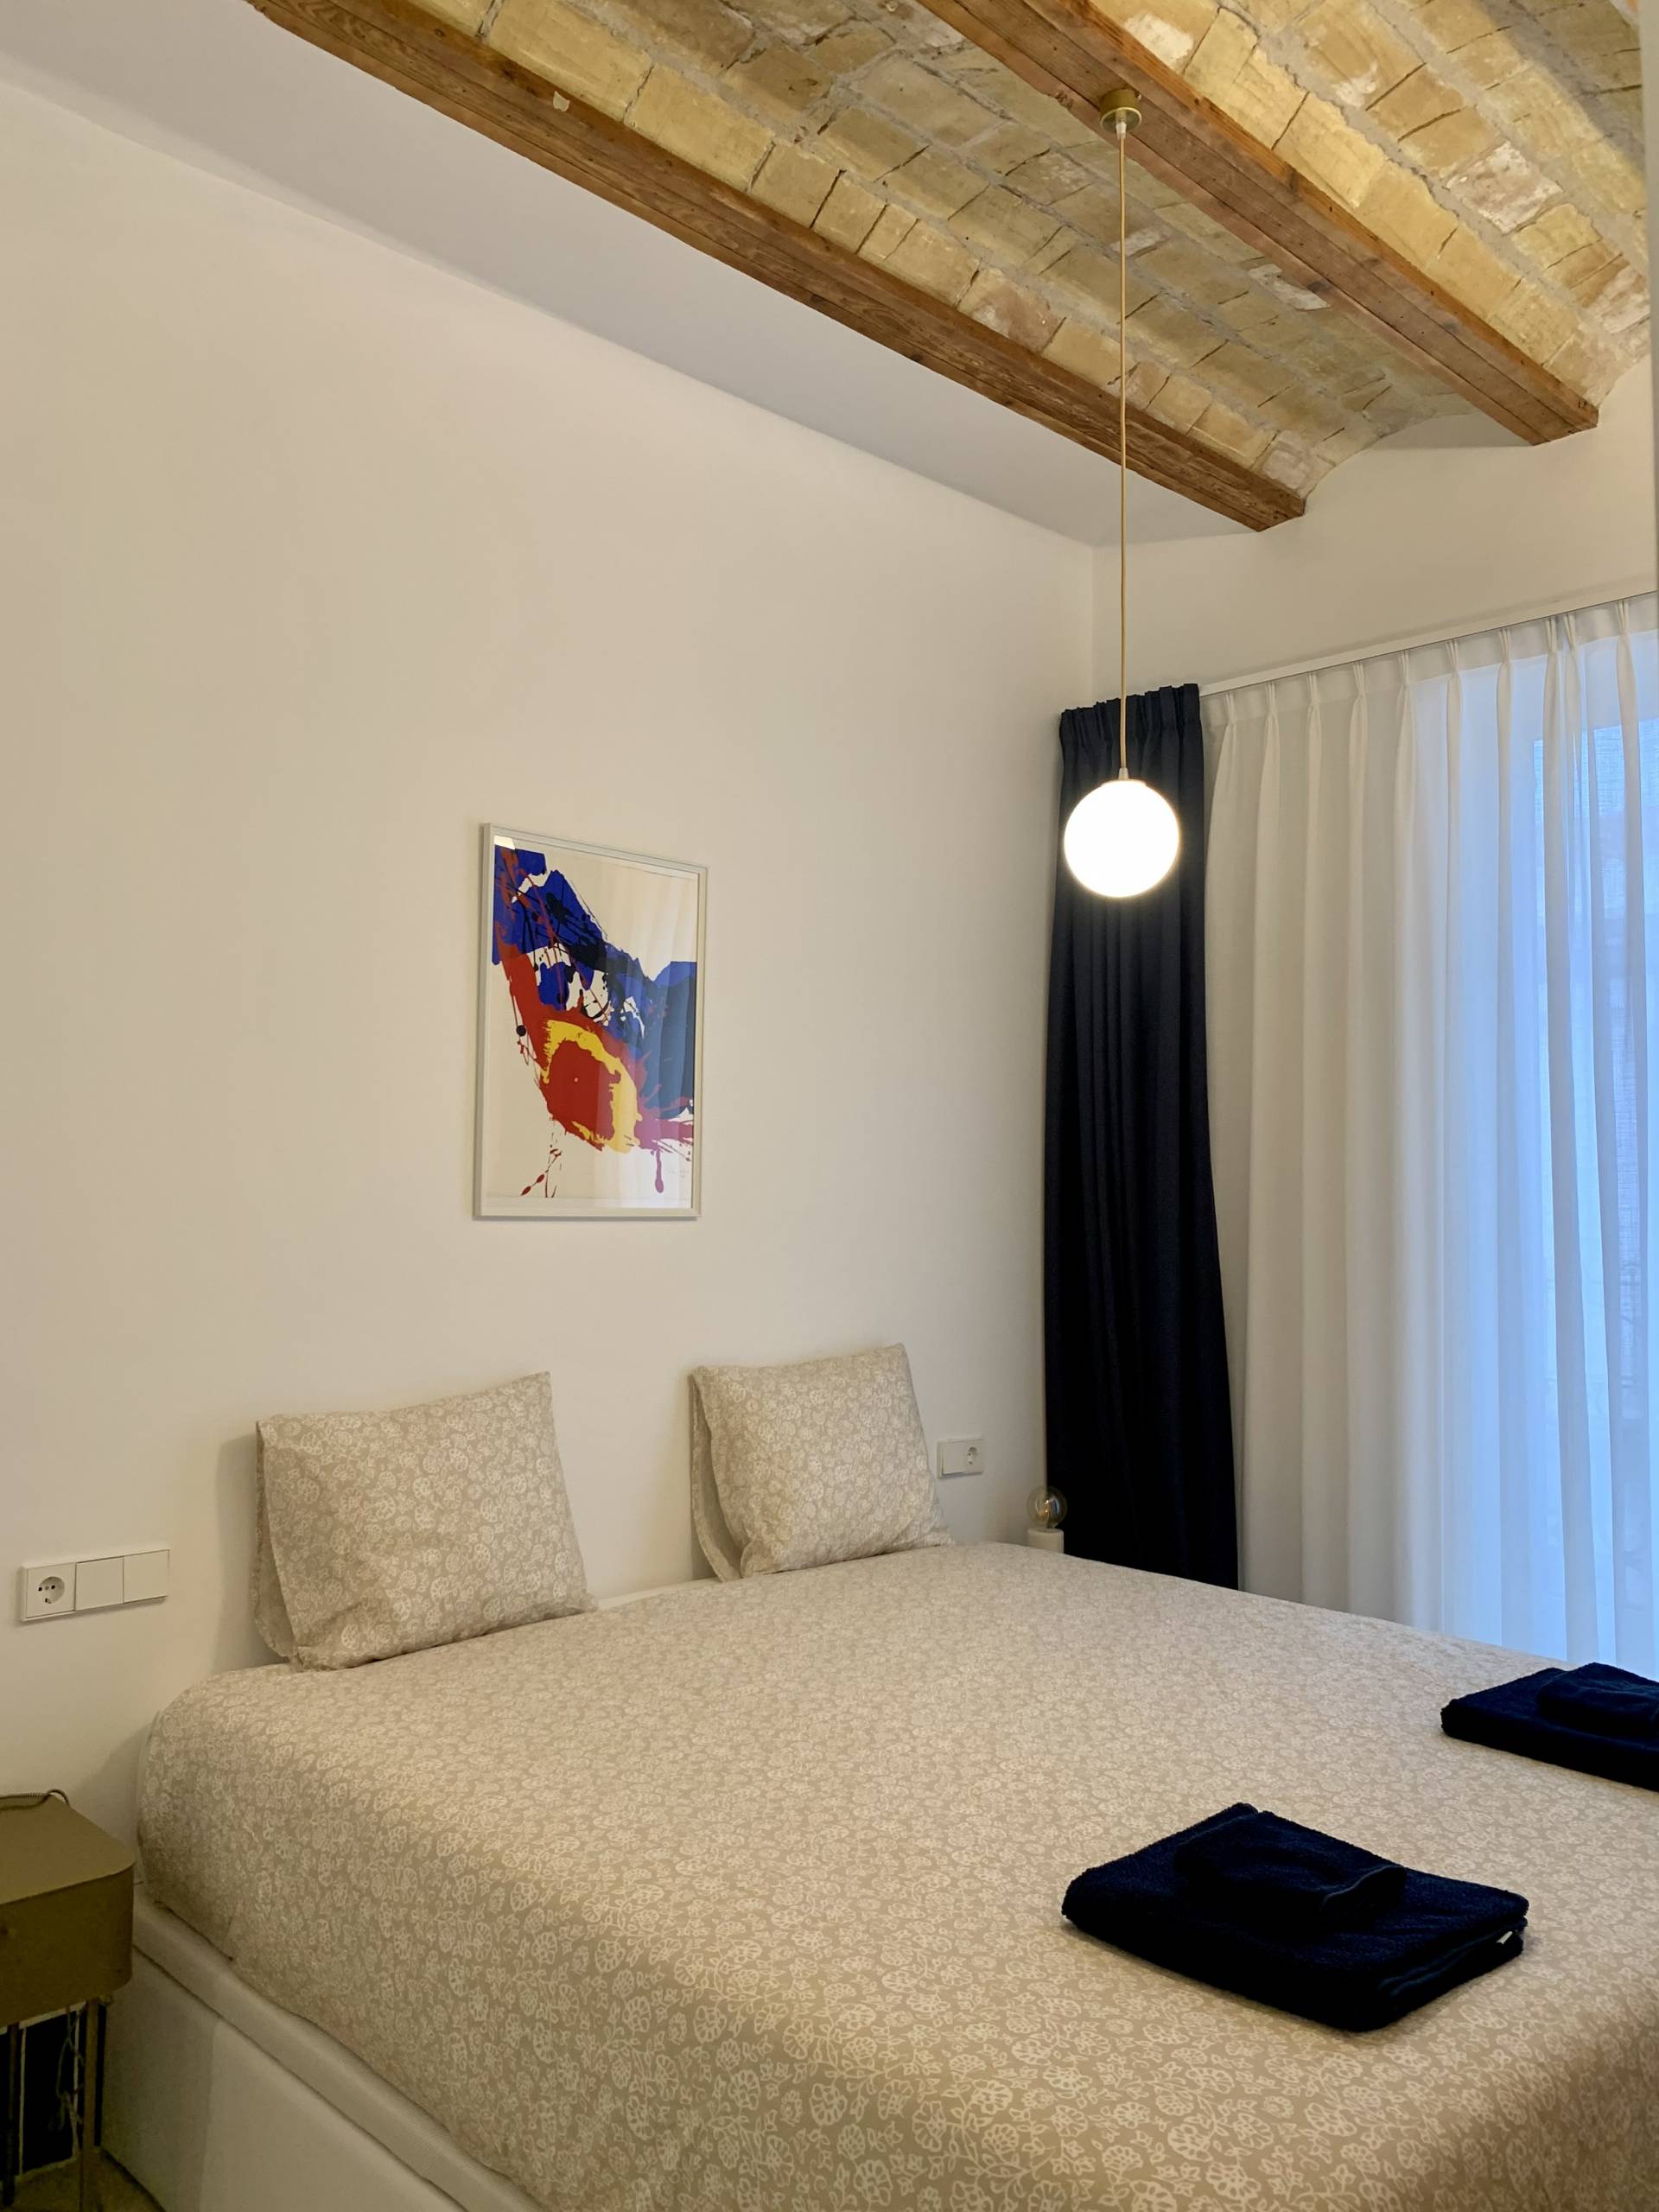 Olivereta - Beautiful monthly rental for rent in Valencia